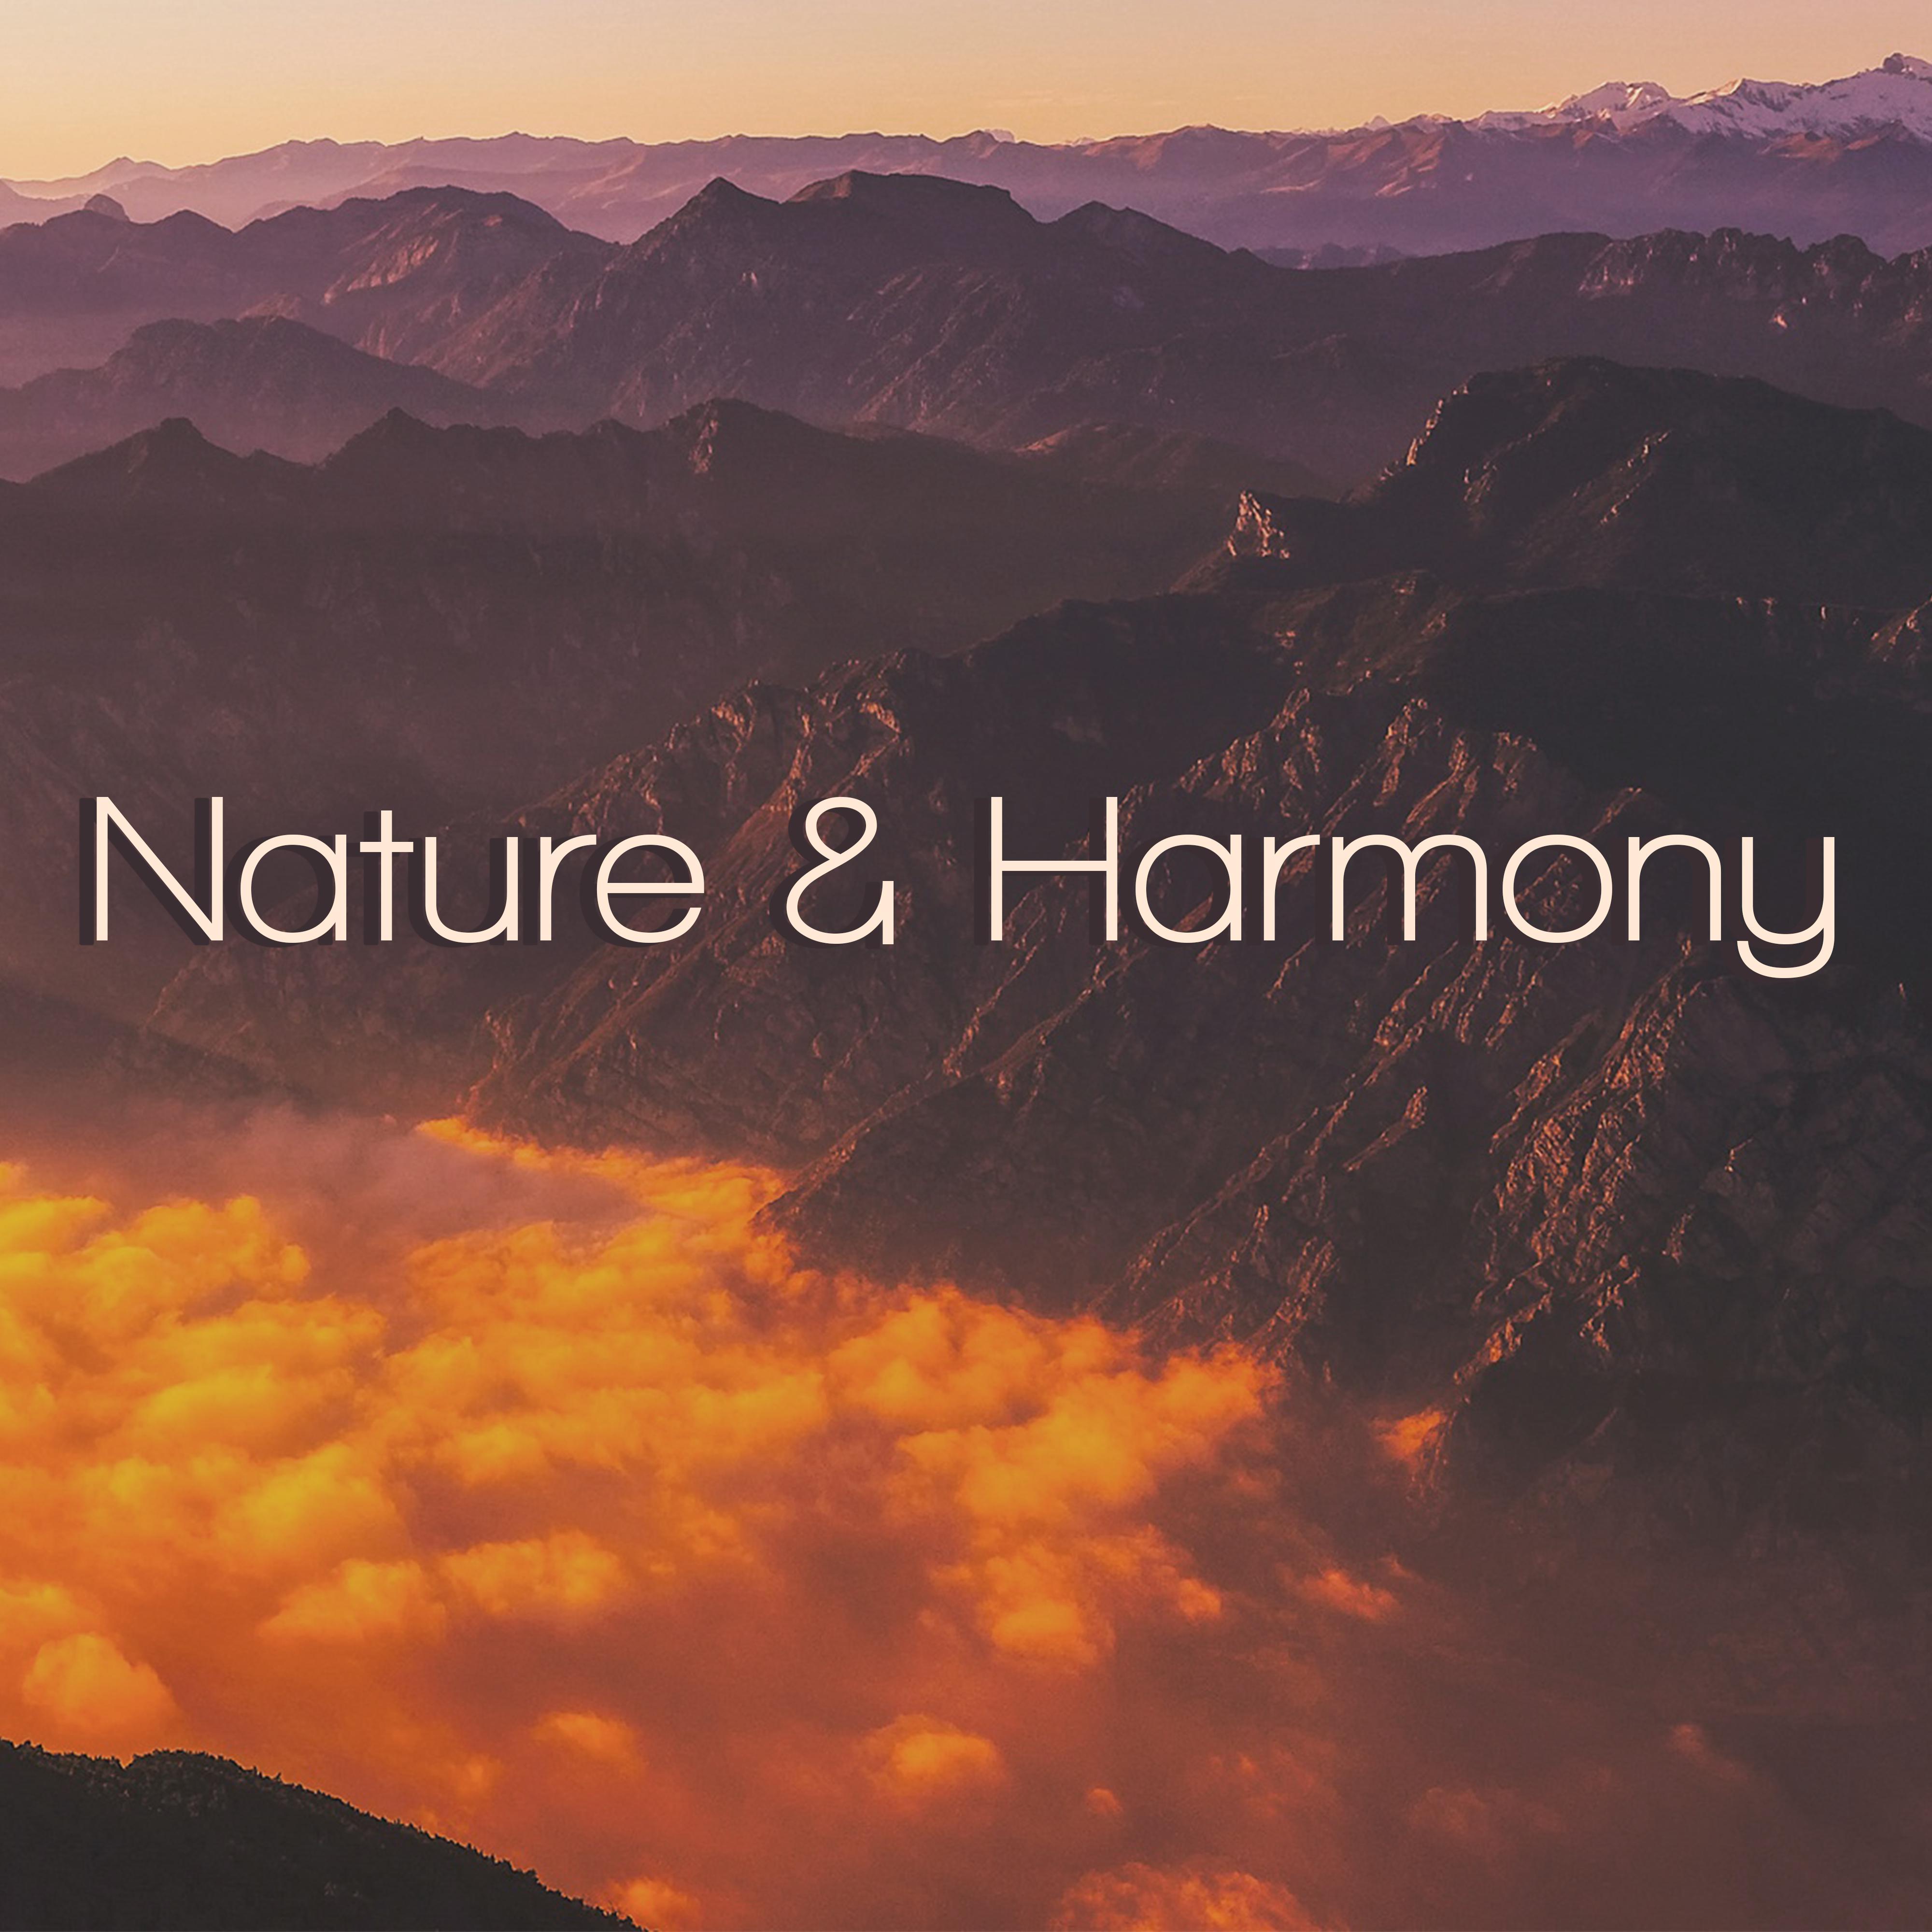 Nature & Harmony – Calmness, New Age Music, Peaceful Mind, Calming Music, Nature Sounds, Zen, Meditation